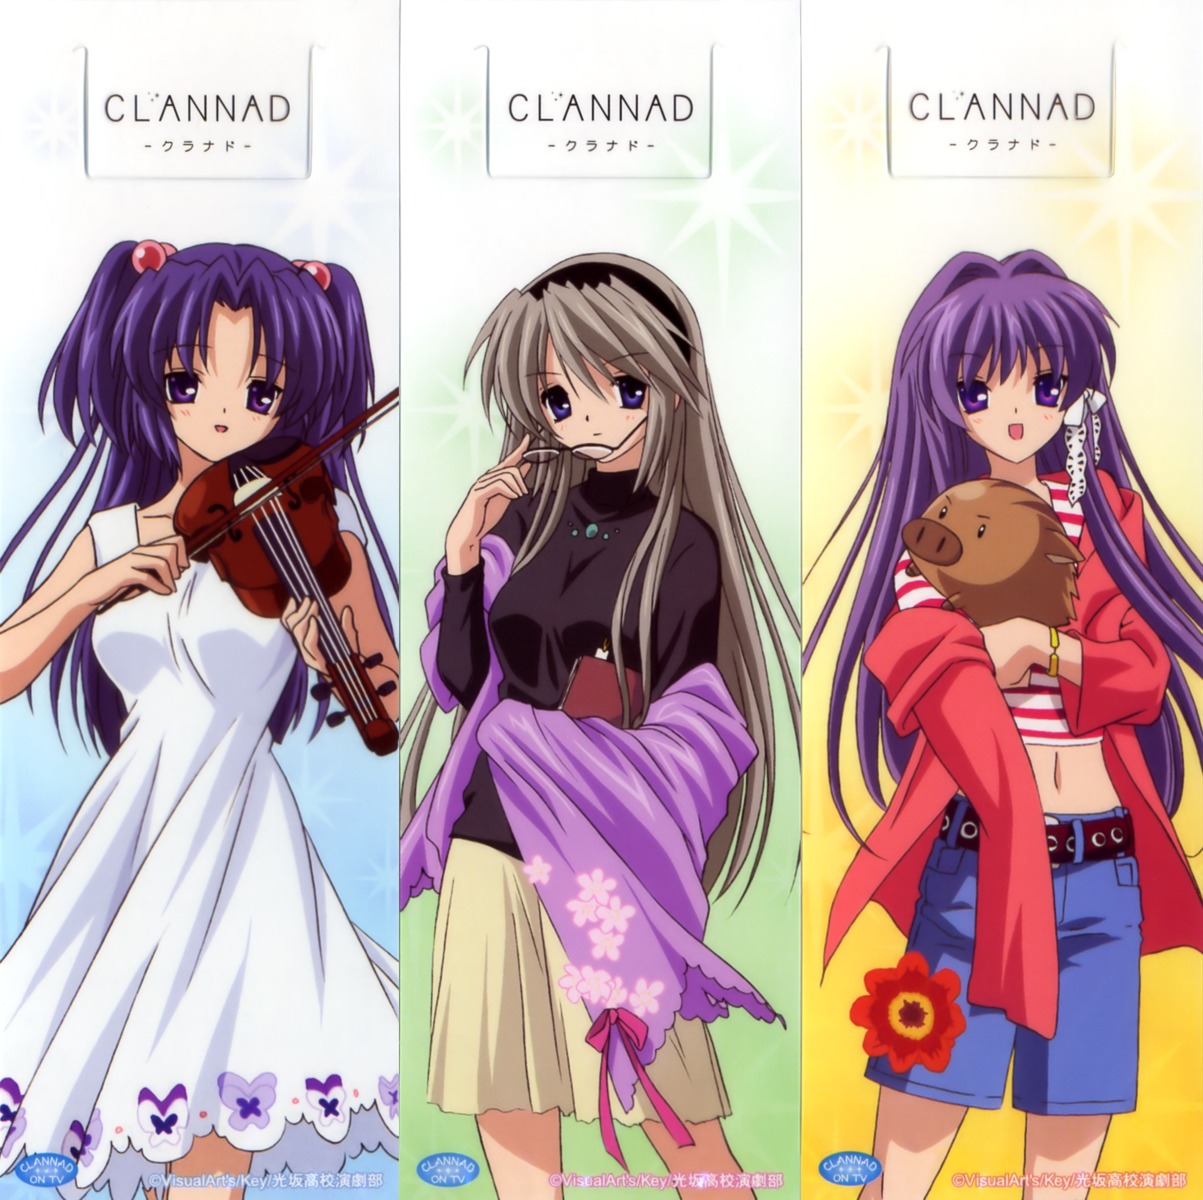  NewBrightBase Clannad After Story Fabric Cloth Rolled